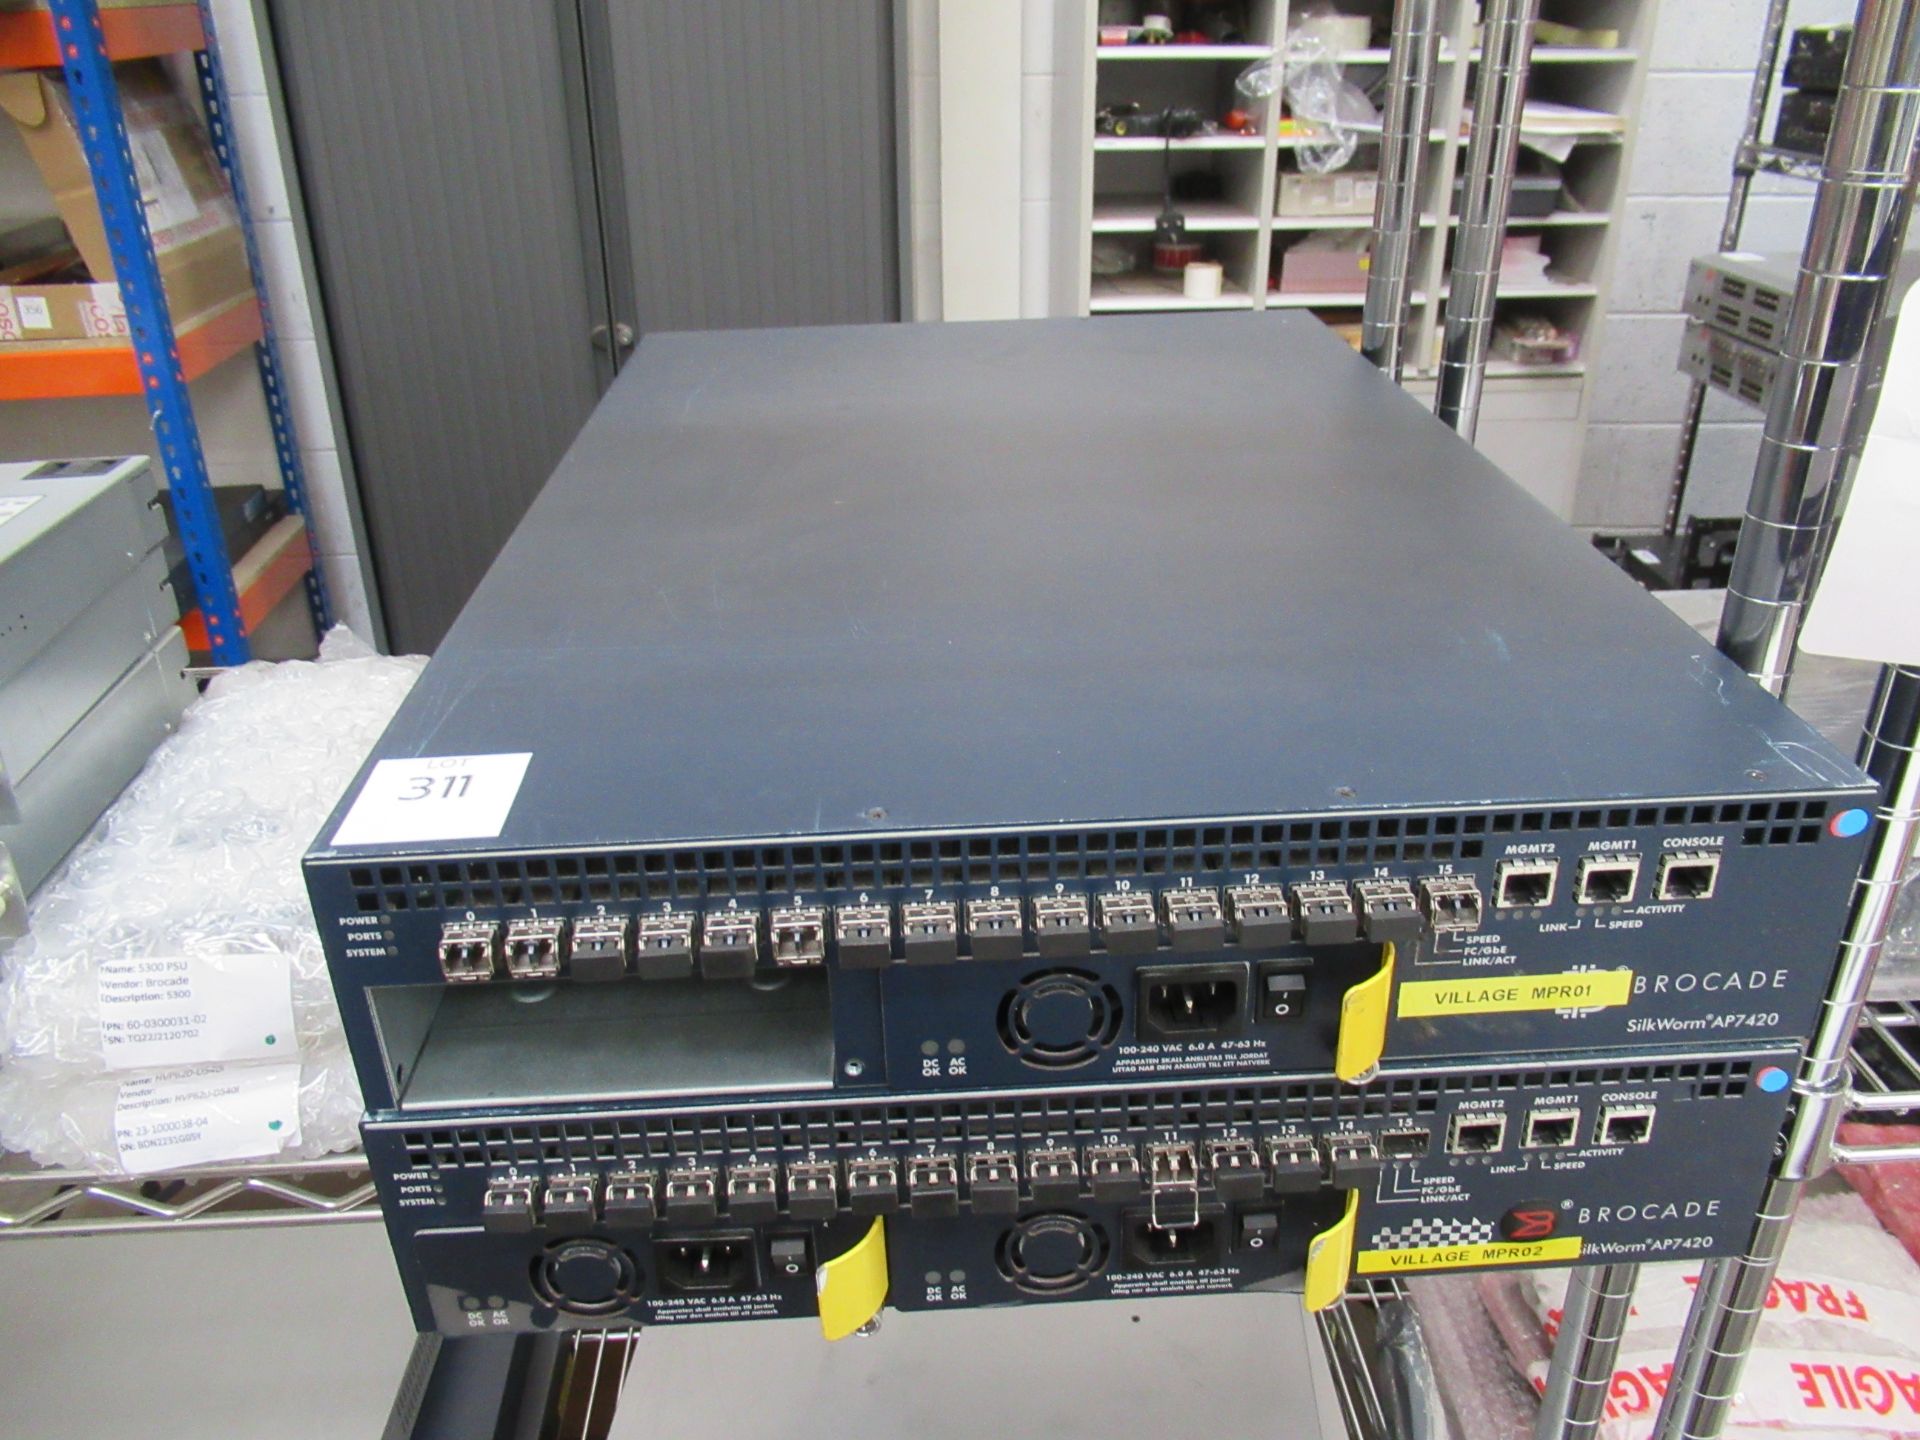 2 x Brocade AP7420 Switch, 2 x H3C S550 Series Ethernet Switch with CX4 Coupling Cable, 3 x - Image 5 of 38